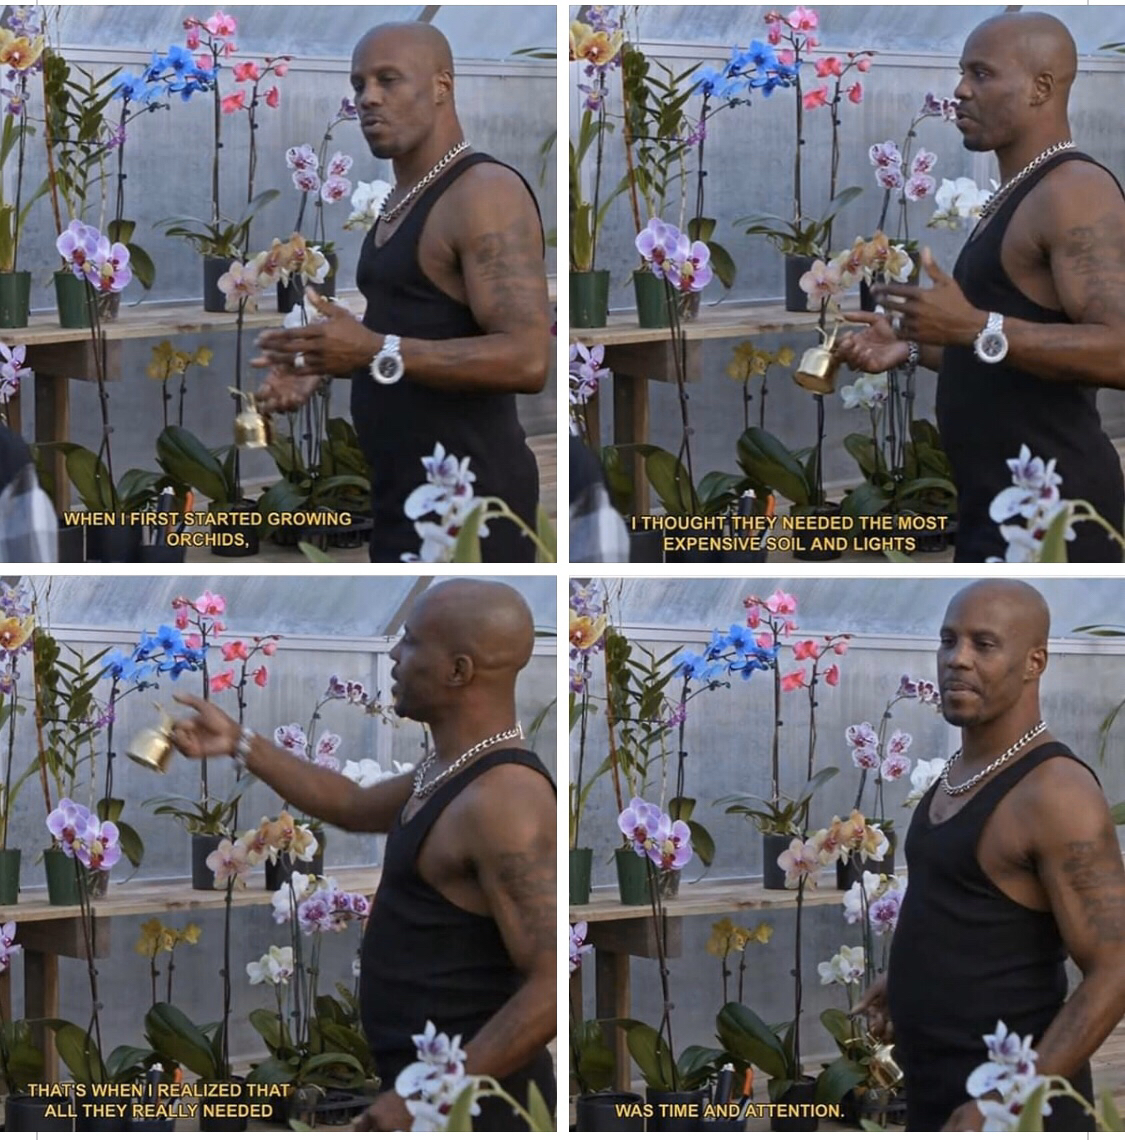 muscle - When I First Started Growing Orchids. I Thought They Needed The Most Expensiveasoil And Lights Thats When Realized That All They Really Needed As Time And Attention